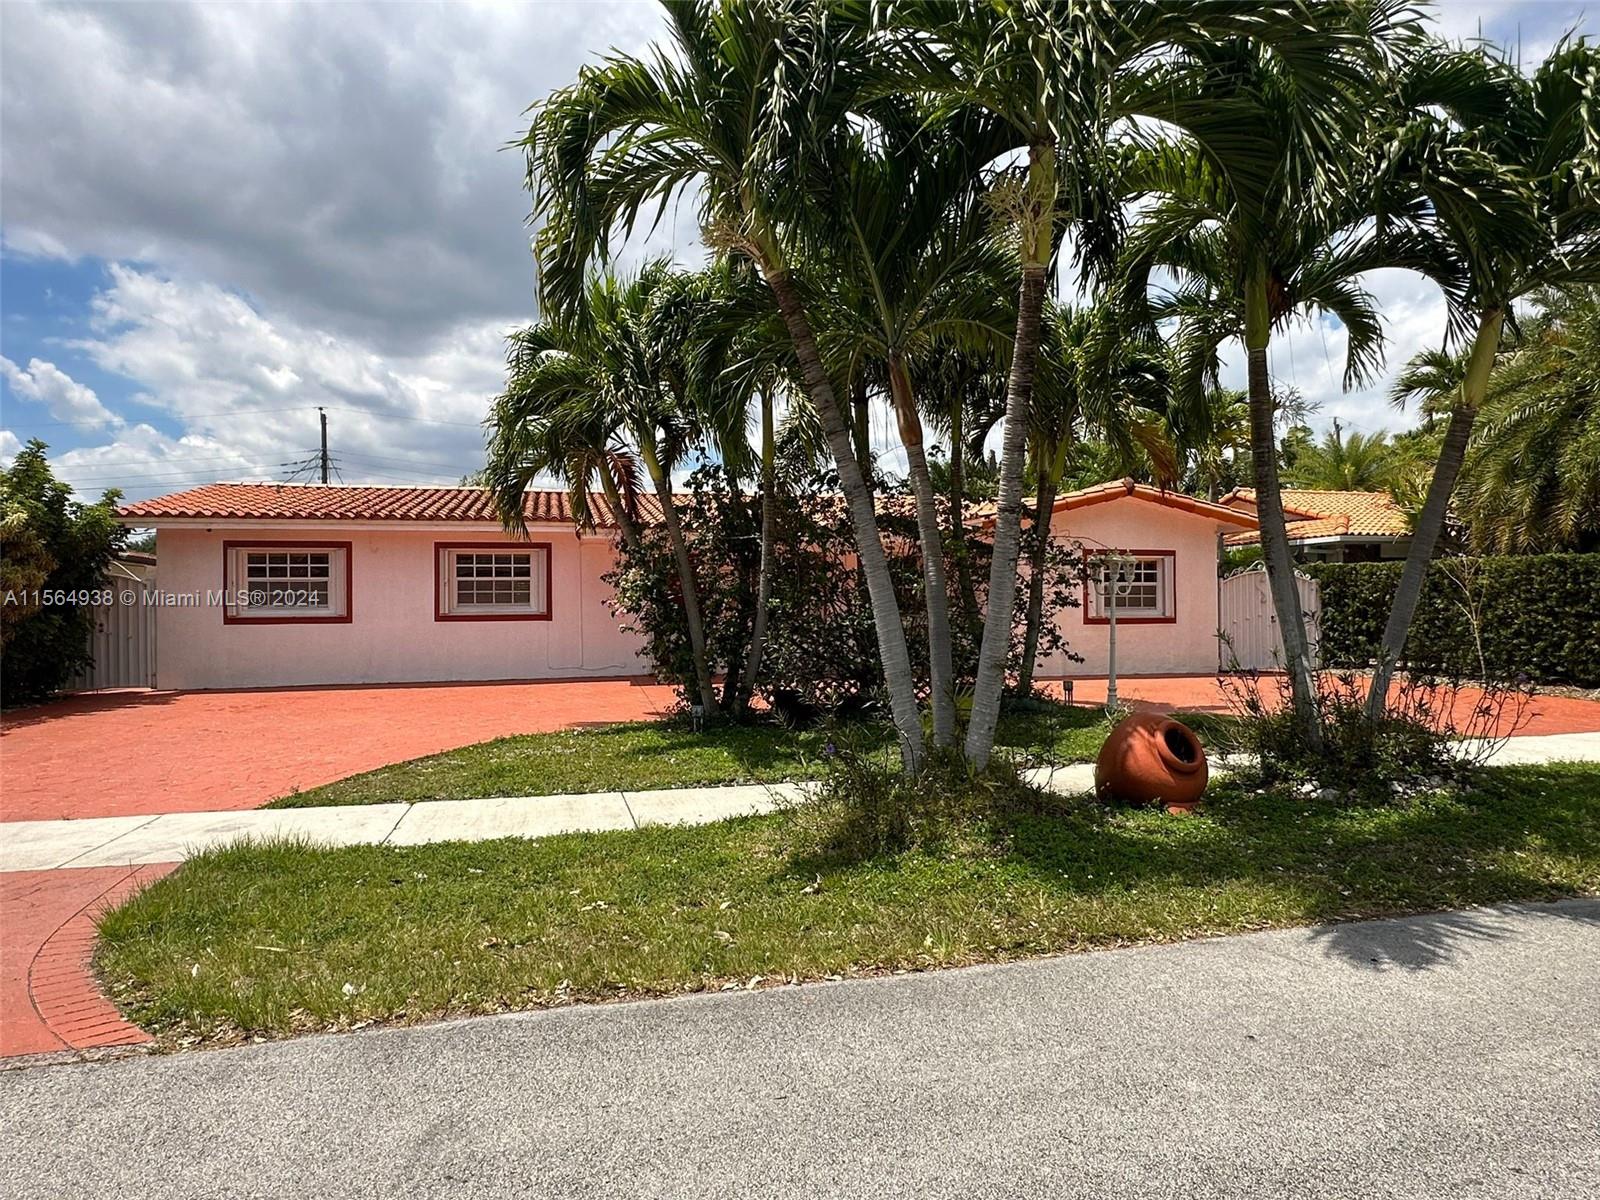 Property for Sale at 3010 Sw 77th Pl Pl, Miami, Broward County, Florida - Bedrooms: 5 
Bathrooms: 4  - $795,000